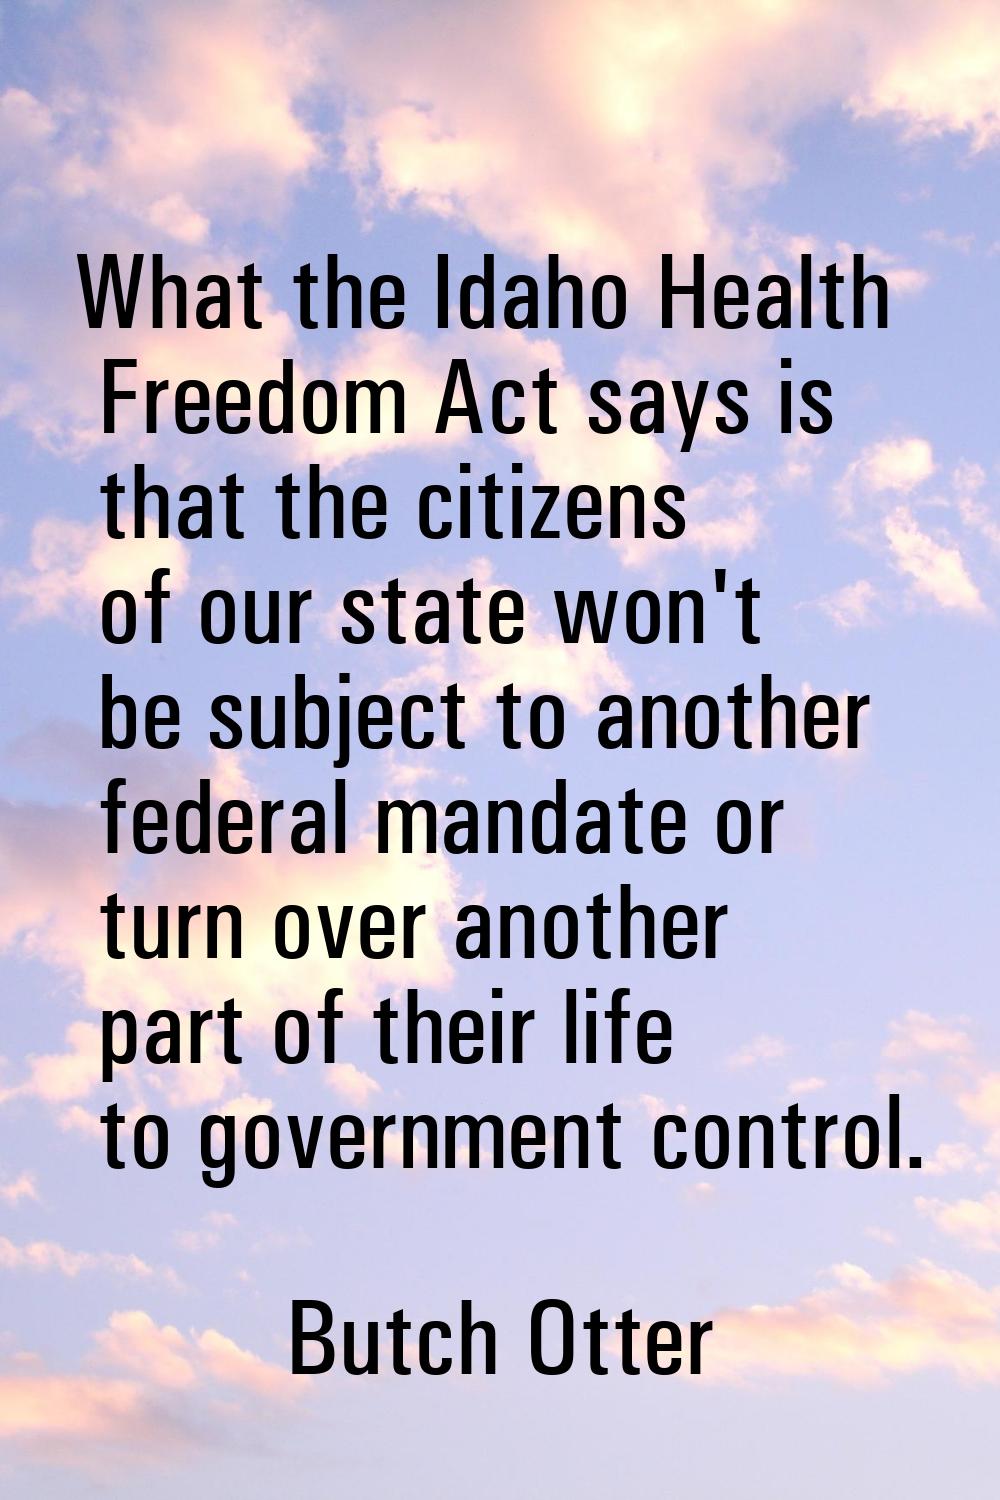 What the Idaho Health Freedom Act says is that the citizens of our state won't be subject to anothe